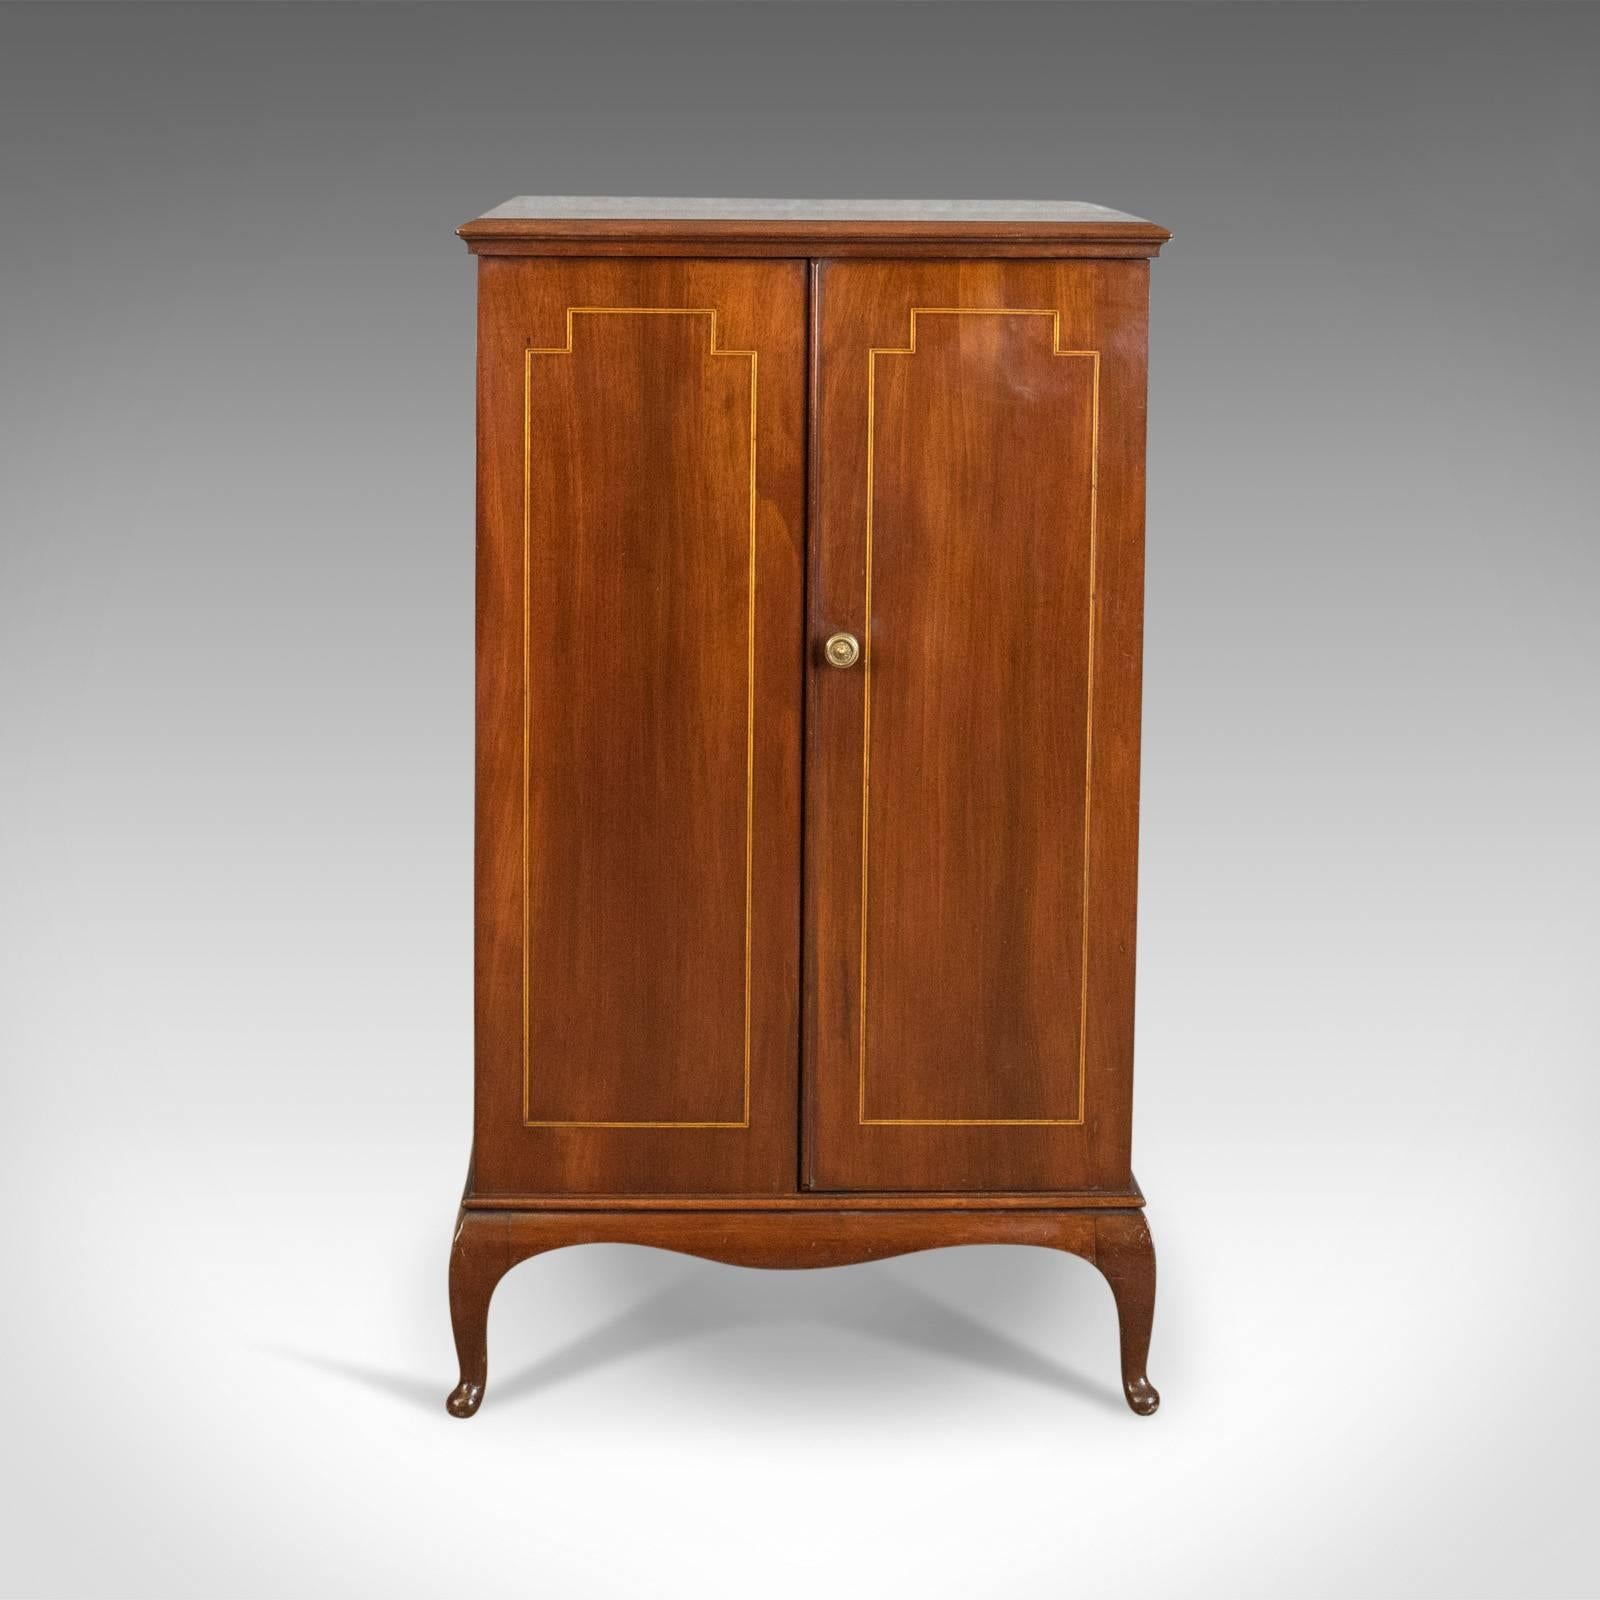 This is an antique cabinet, a filing, side, bedside or nightstand cupboard in mahogany, English and dating to the Edwardian period circa 1910.

Attractive russet tones in the well figured, select mahogany
Good color throughout and a desirable